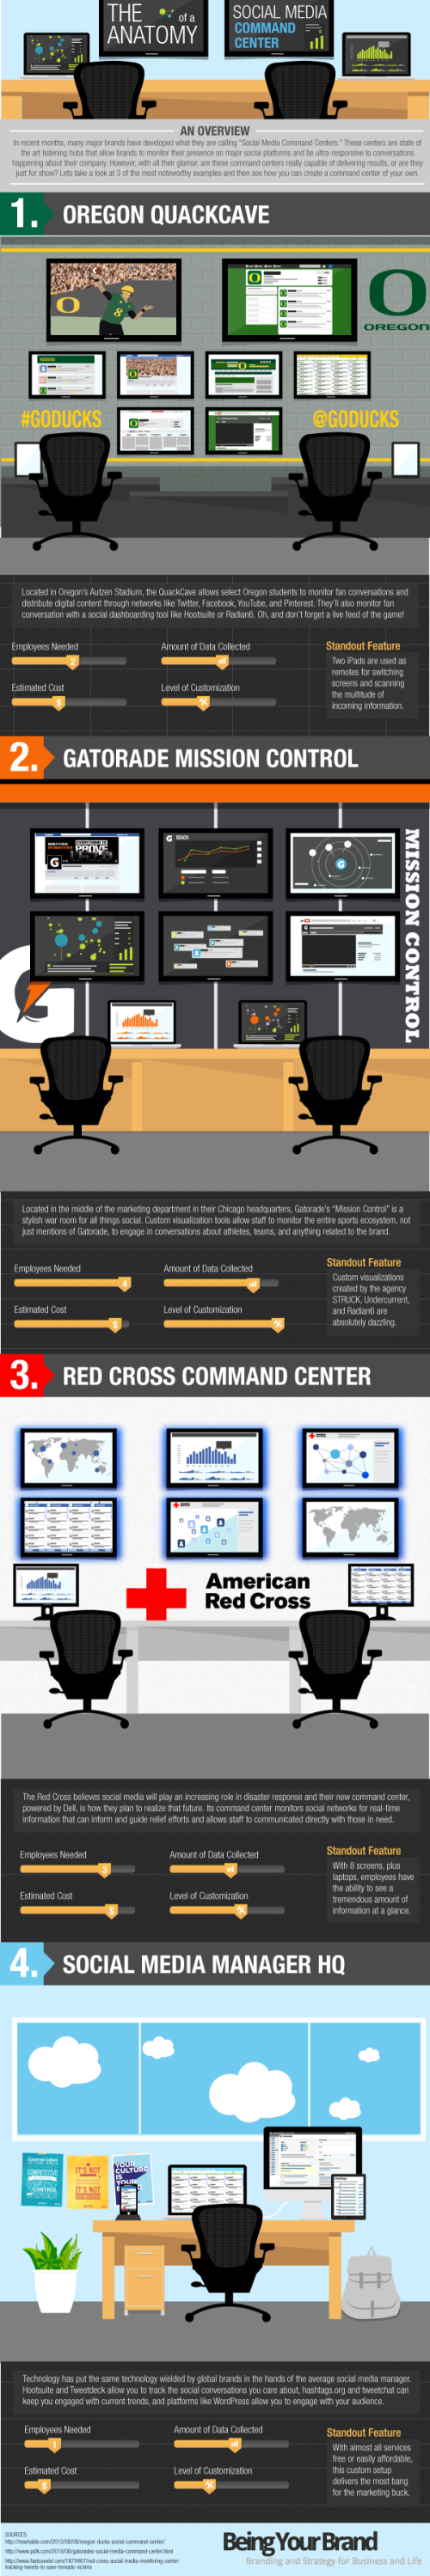 The Anatomy of the Social Media Command Center infographic